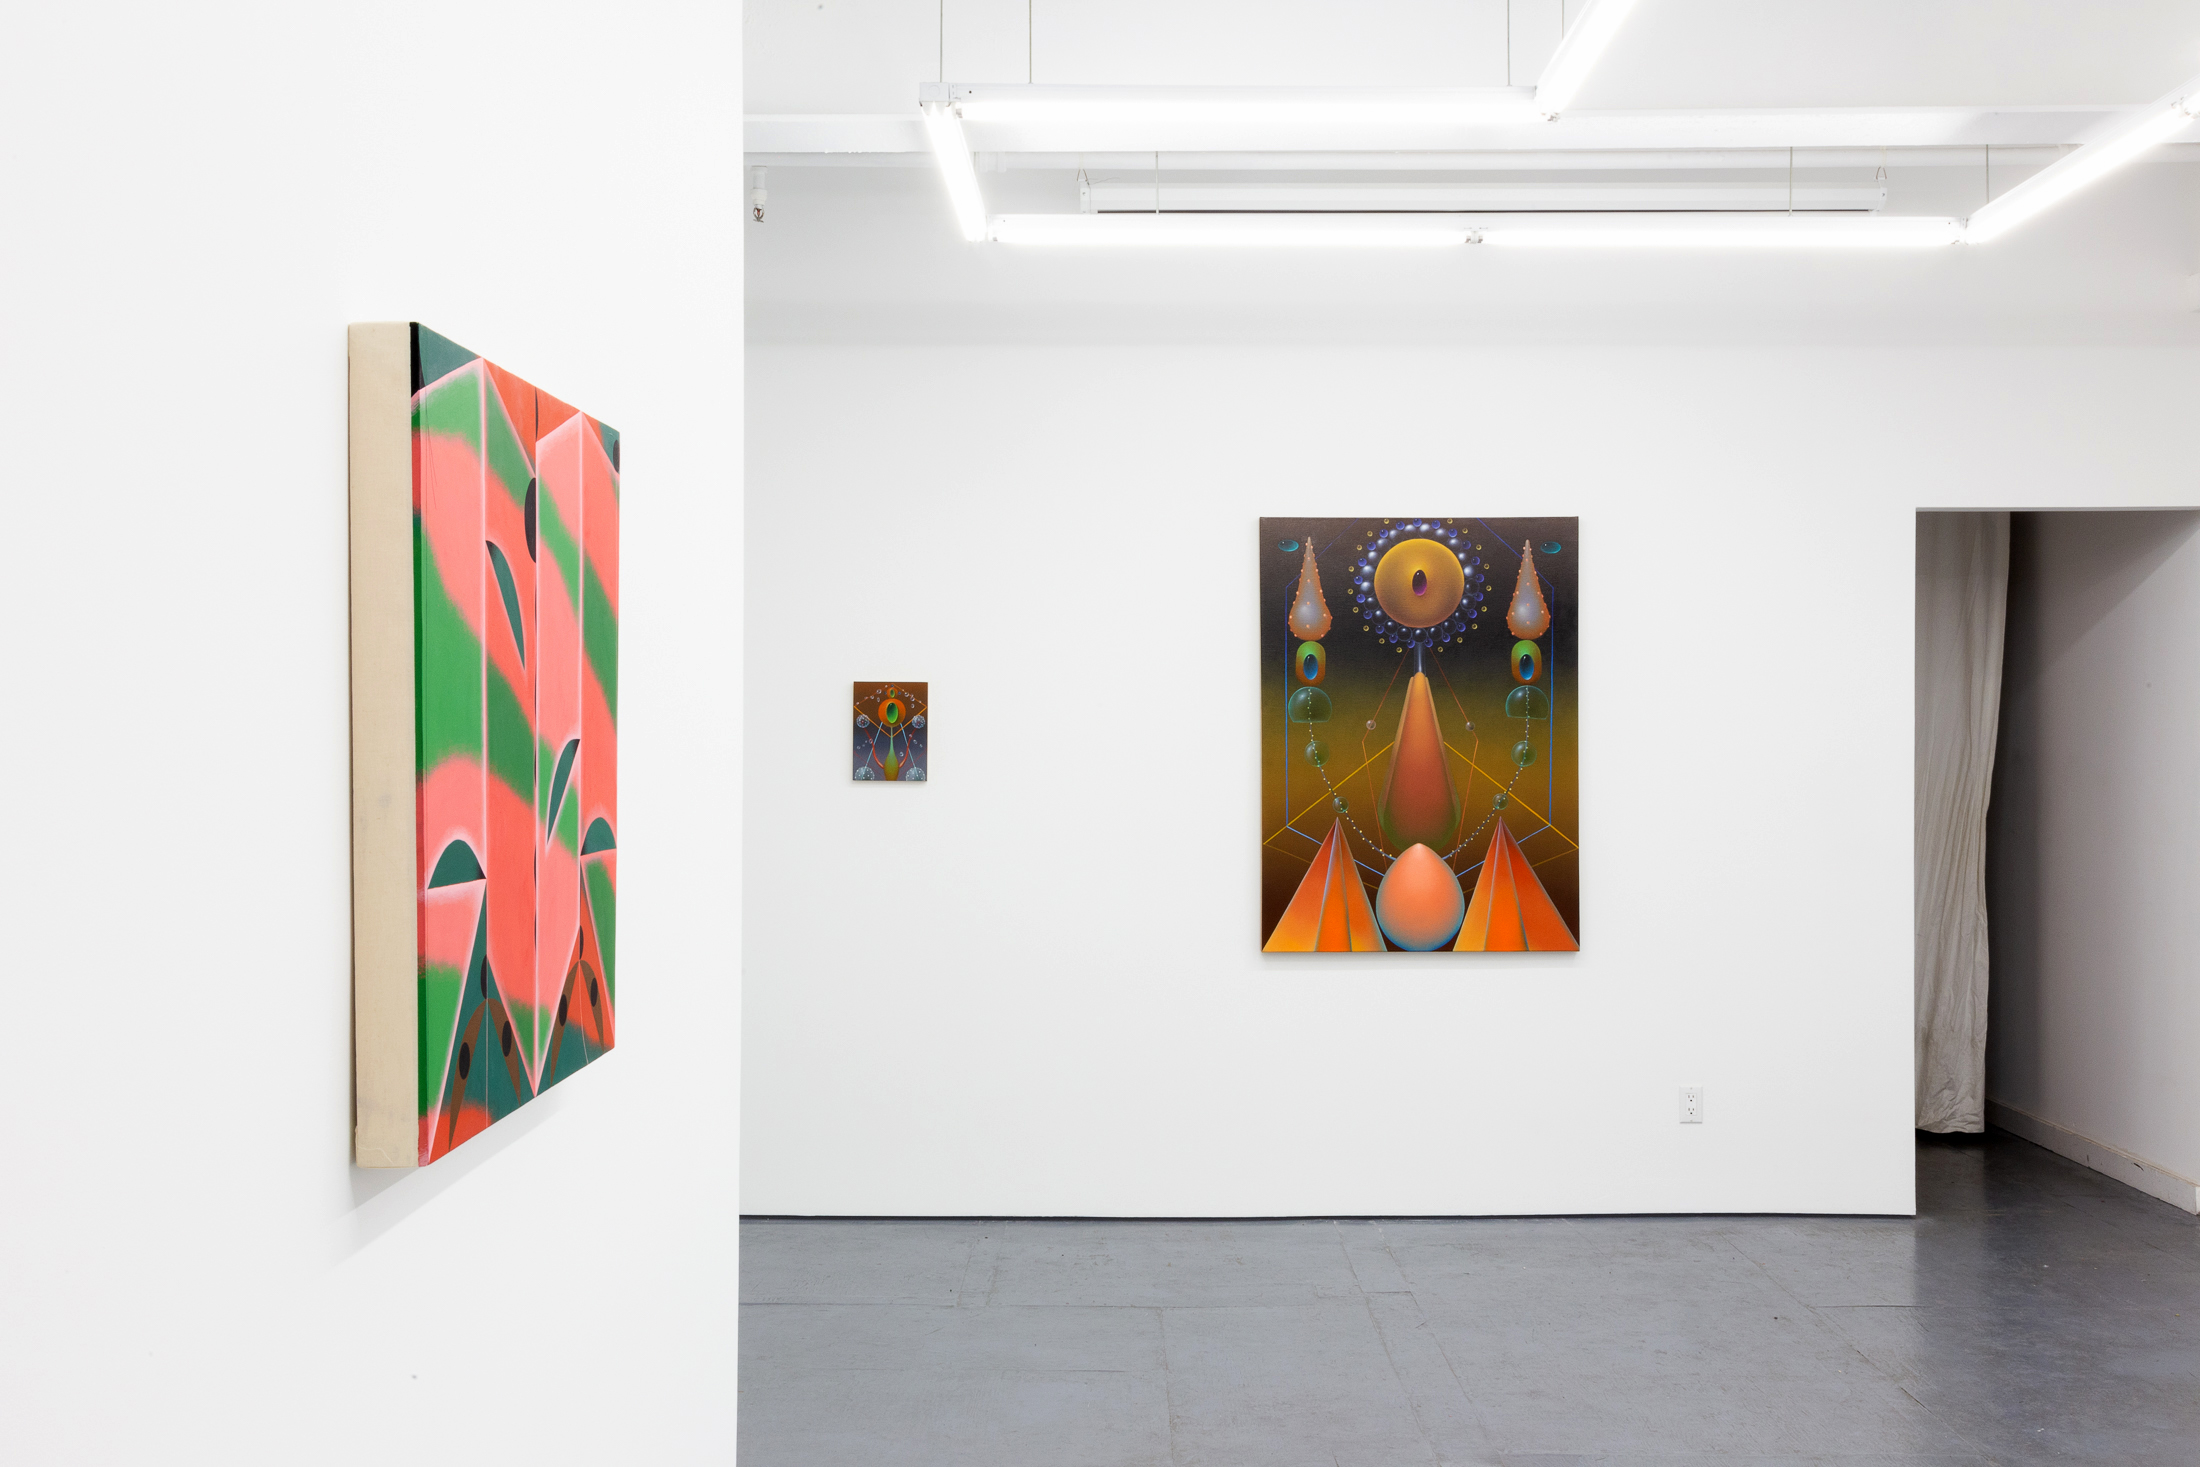  Installation view of Heed by Angela Heisch and Alessandro Keegan at Transmitter 